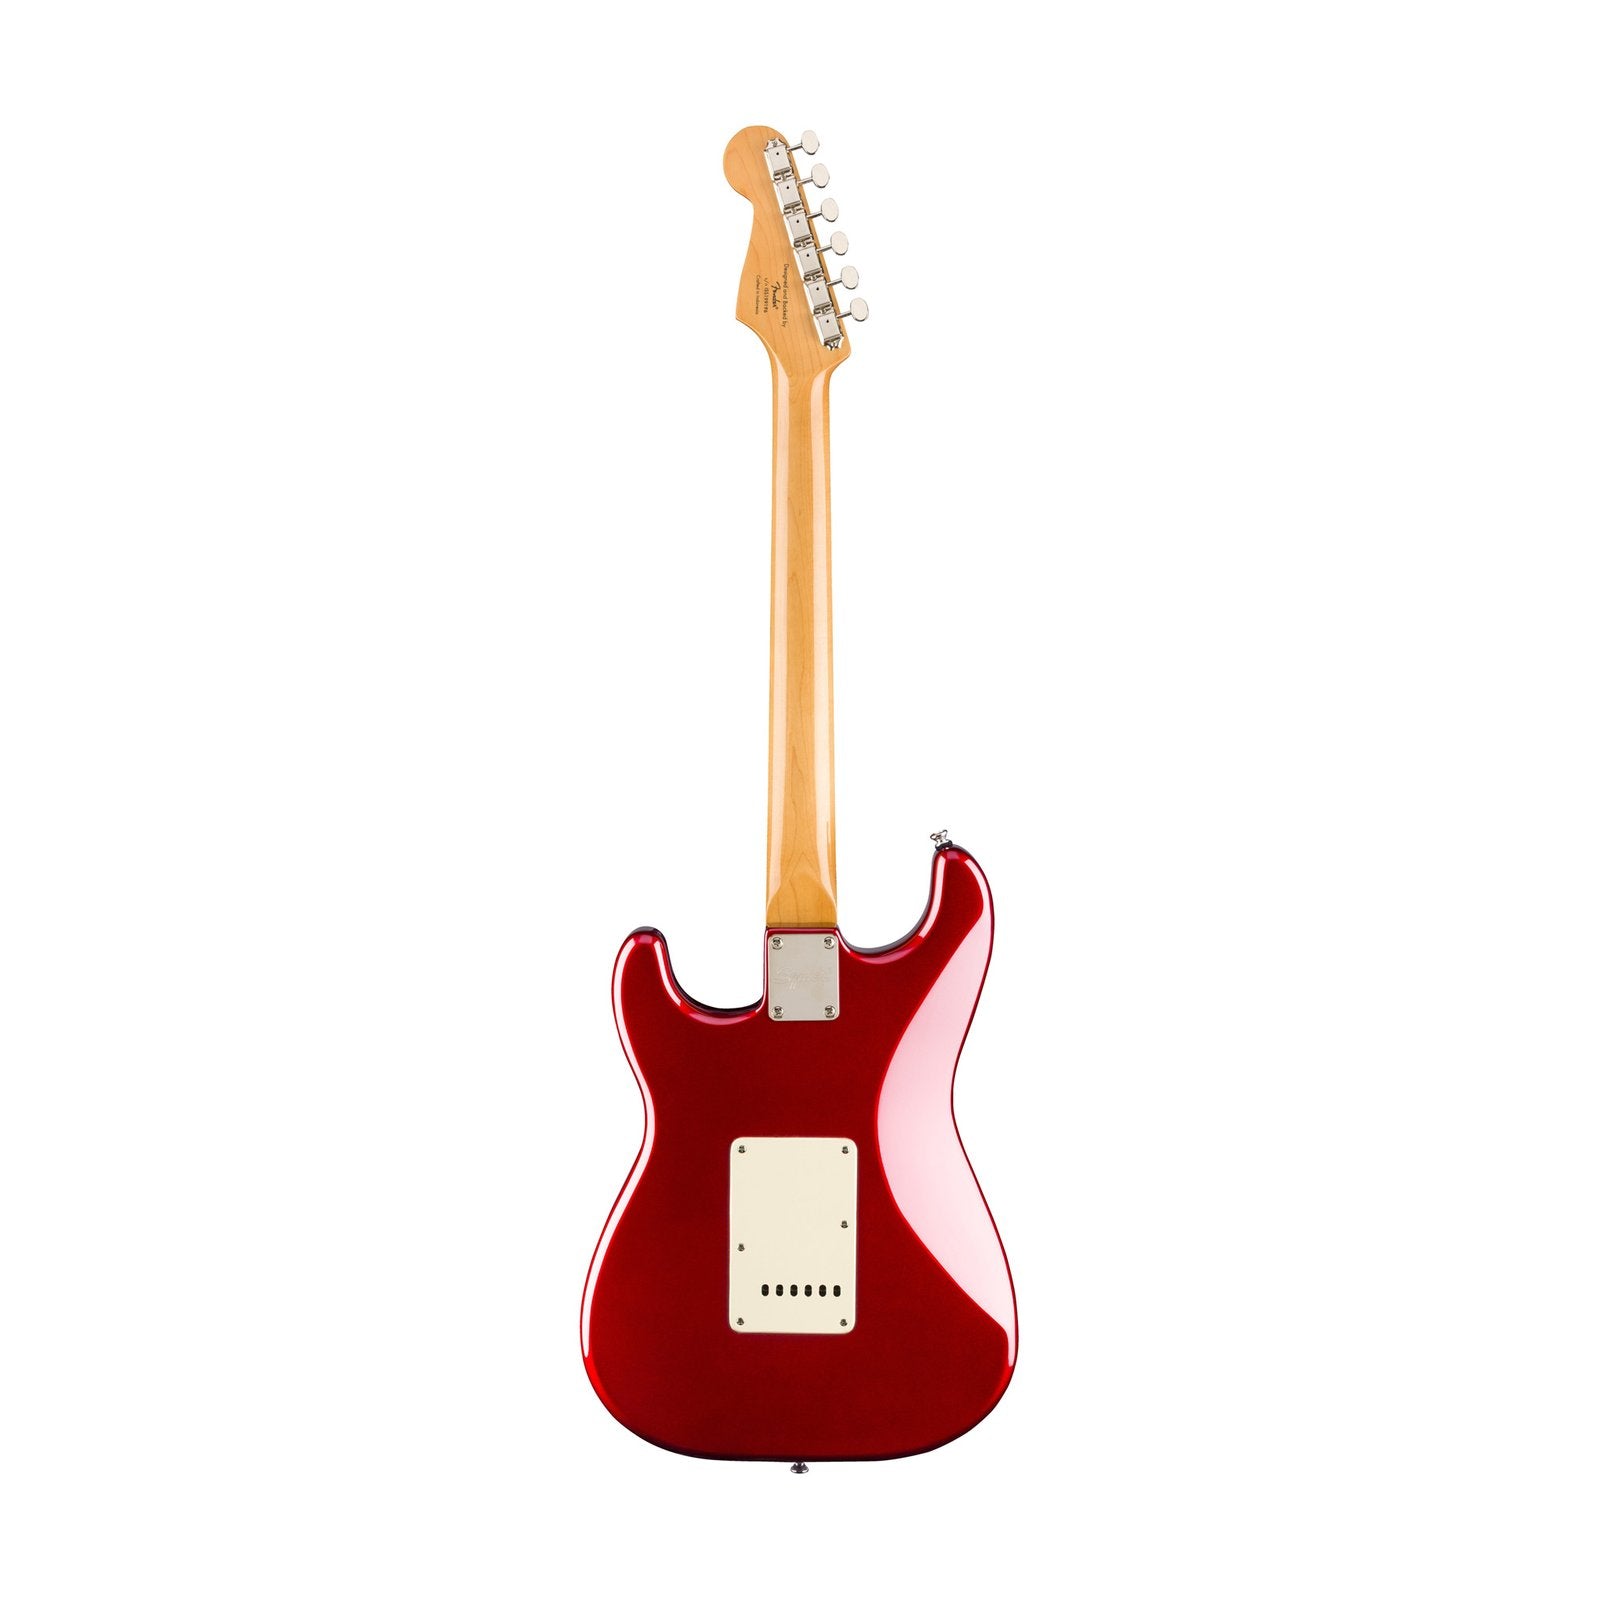 Squier Classic Vibe 60s Stratocaster Electric Guitar, Laurel FB, Candy Apple Red, SQUIER BY FENDER, ELECTRIC GUITAR, squier-by-fender-electric-guitar-037-4010-509, ZOSO MUSIC SDN BHD